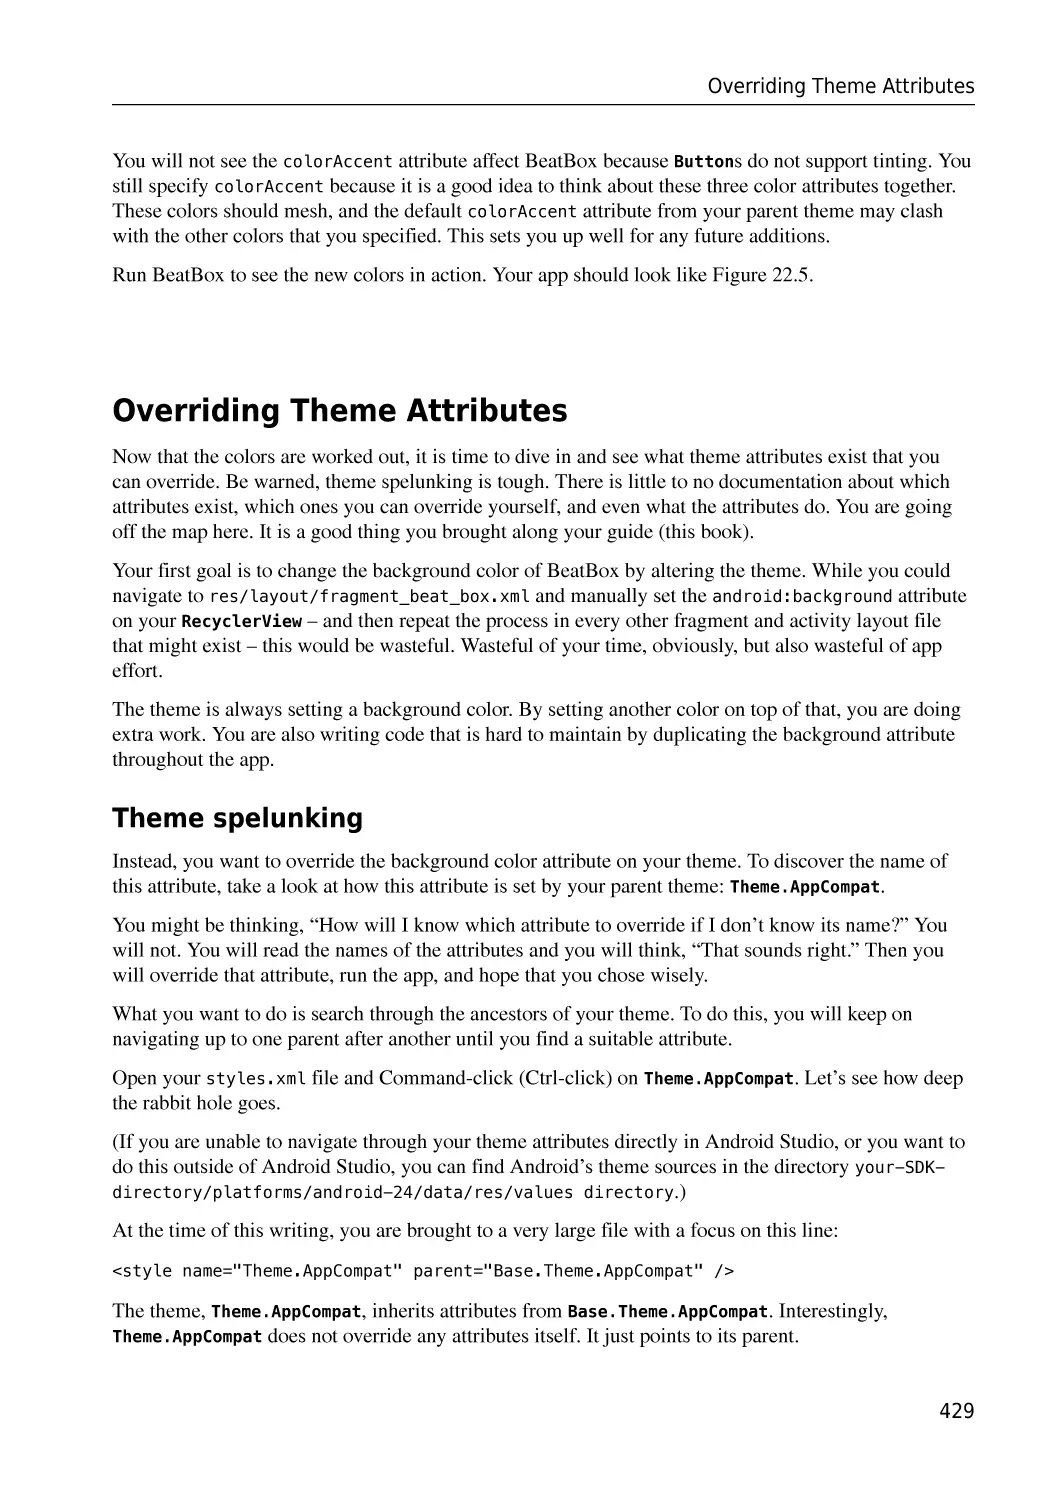 Overriding Theme Attributes
Theme spelunking